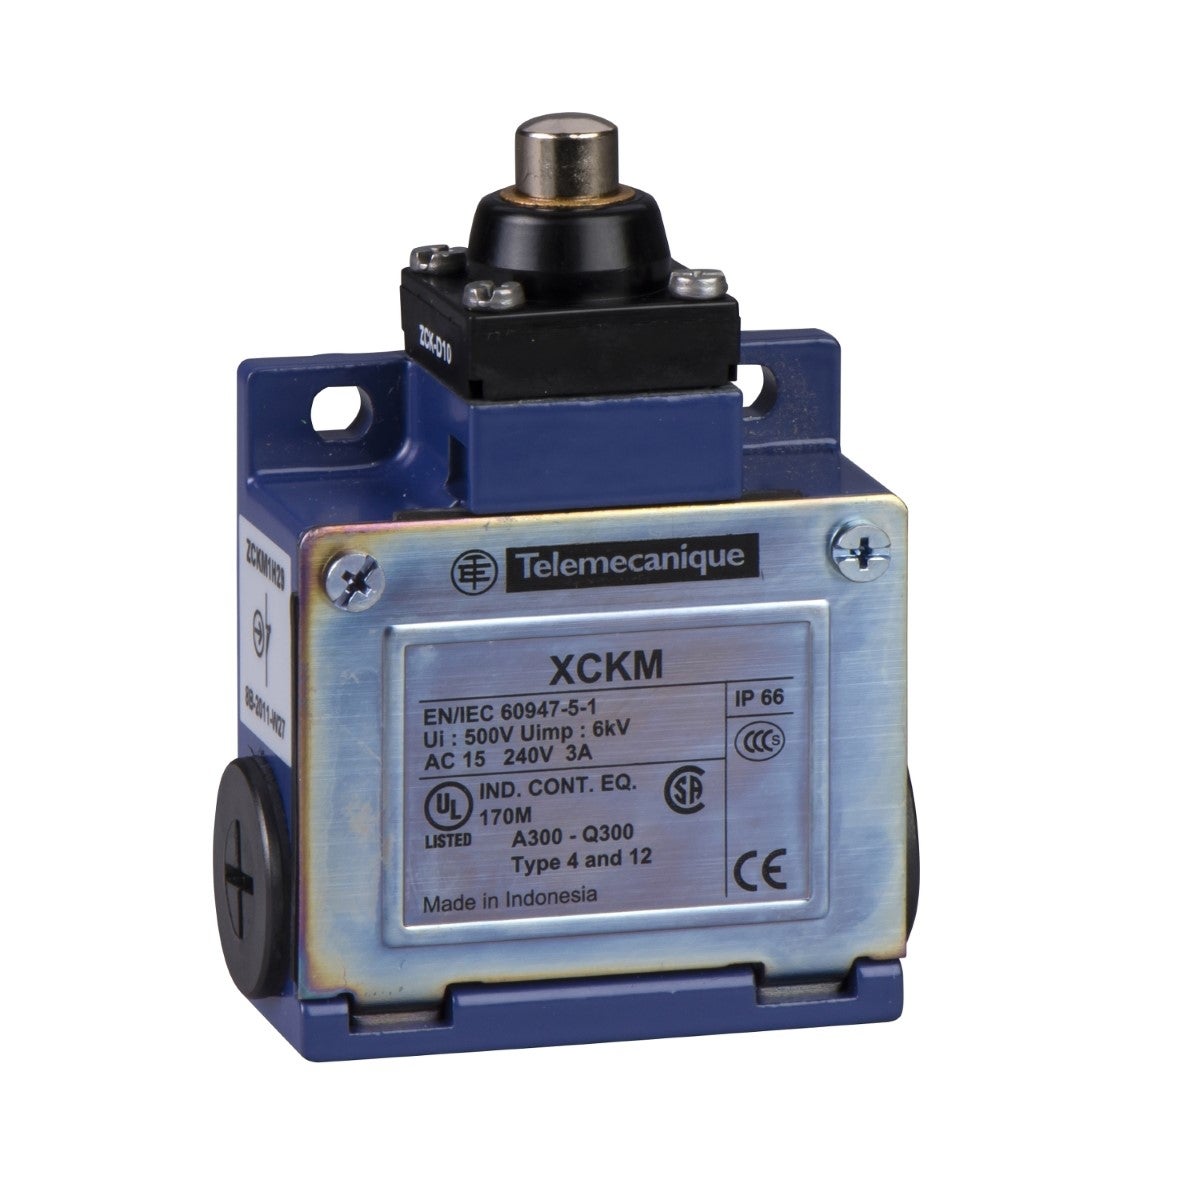 Limit switch, Limit switches XC Standard, XCKM, metal end plunger, 1NC+1 NO, snap action, Pg11